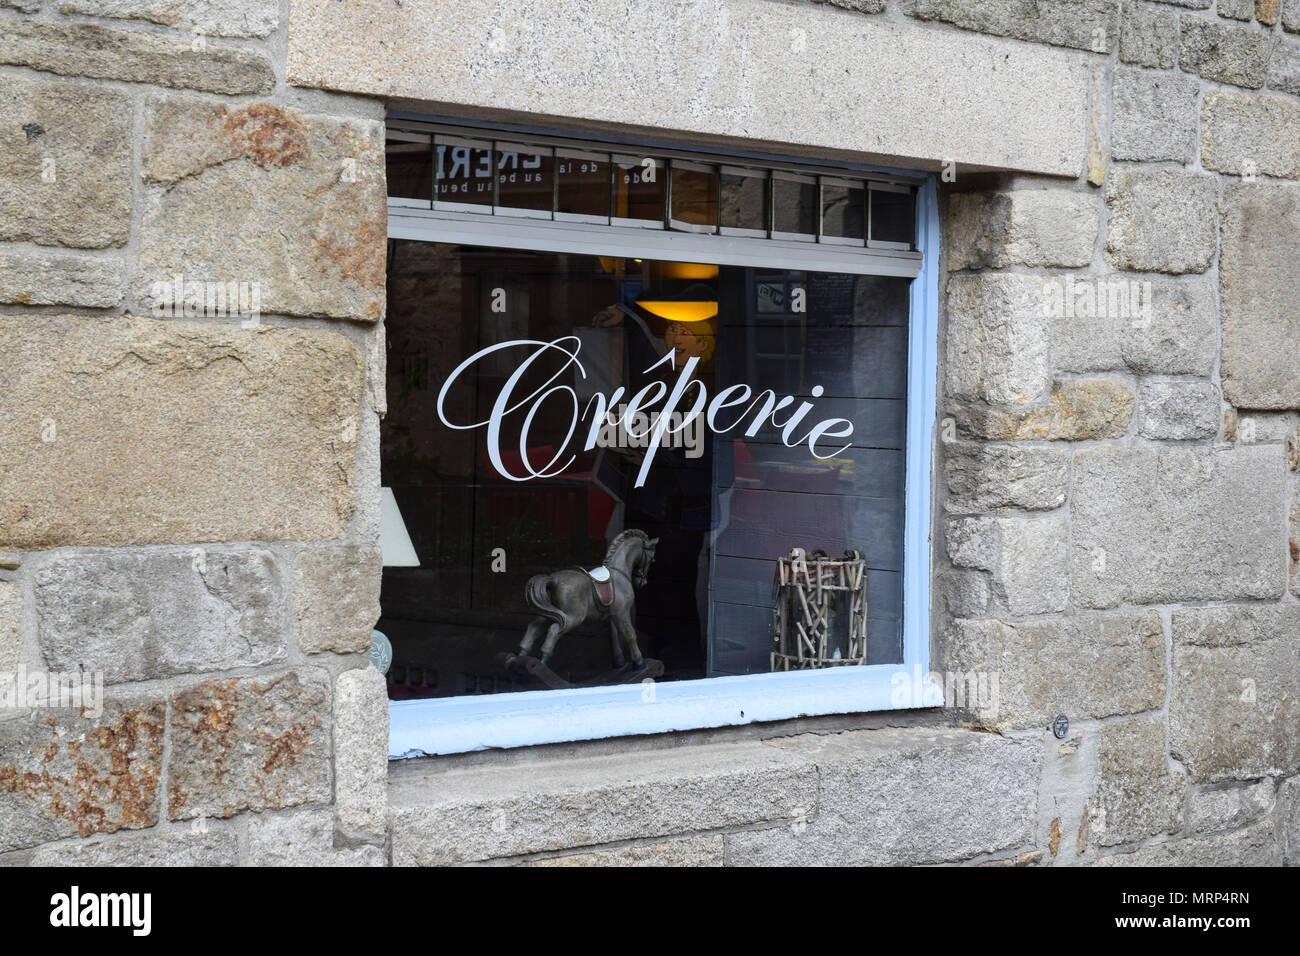 A creperie window in a historic stone building in Brittany, France. Stock Photo